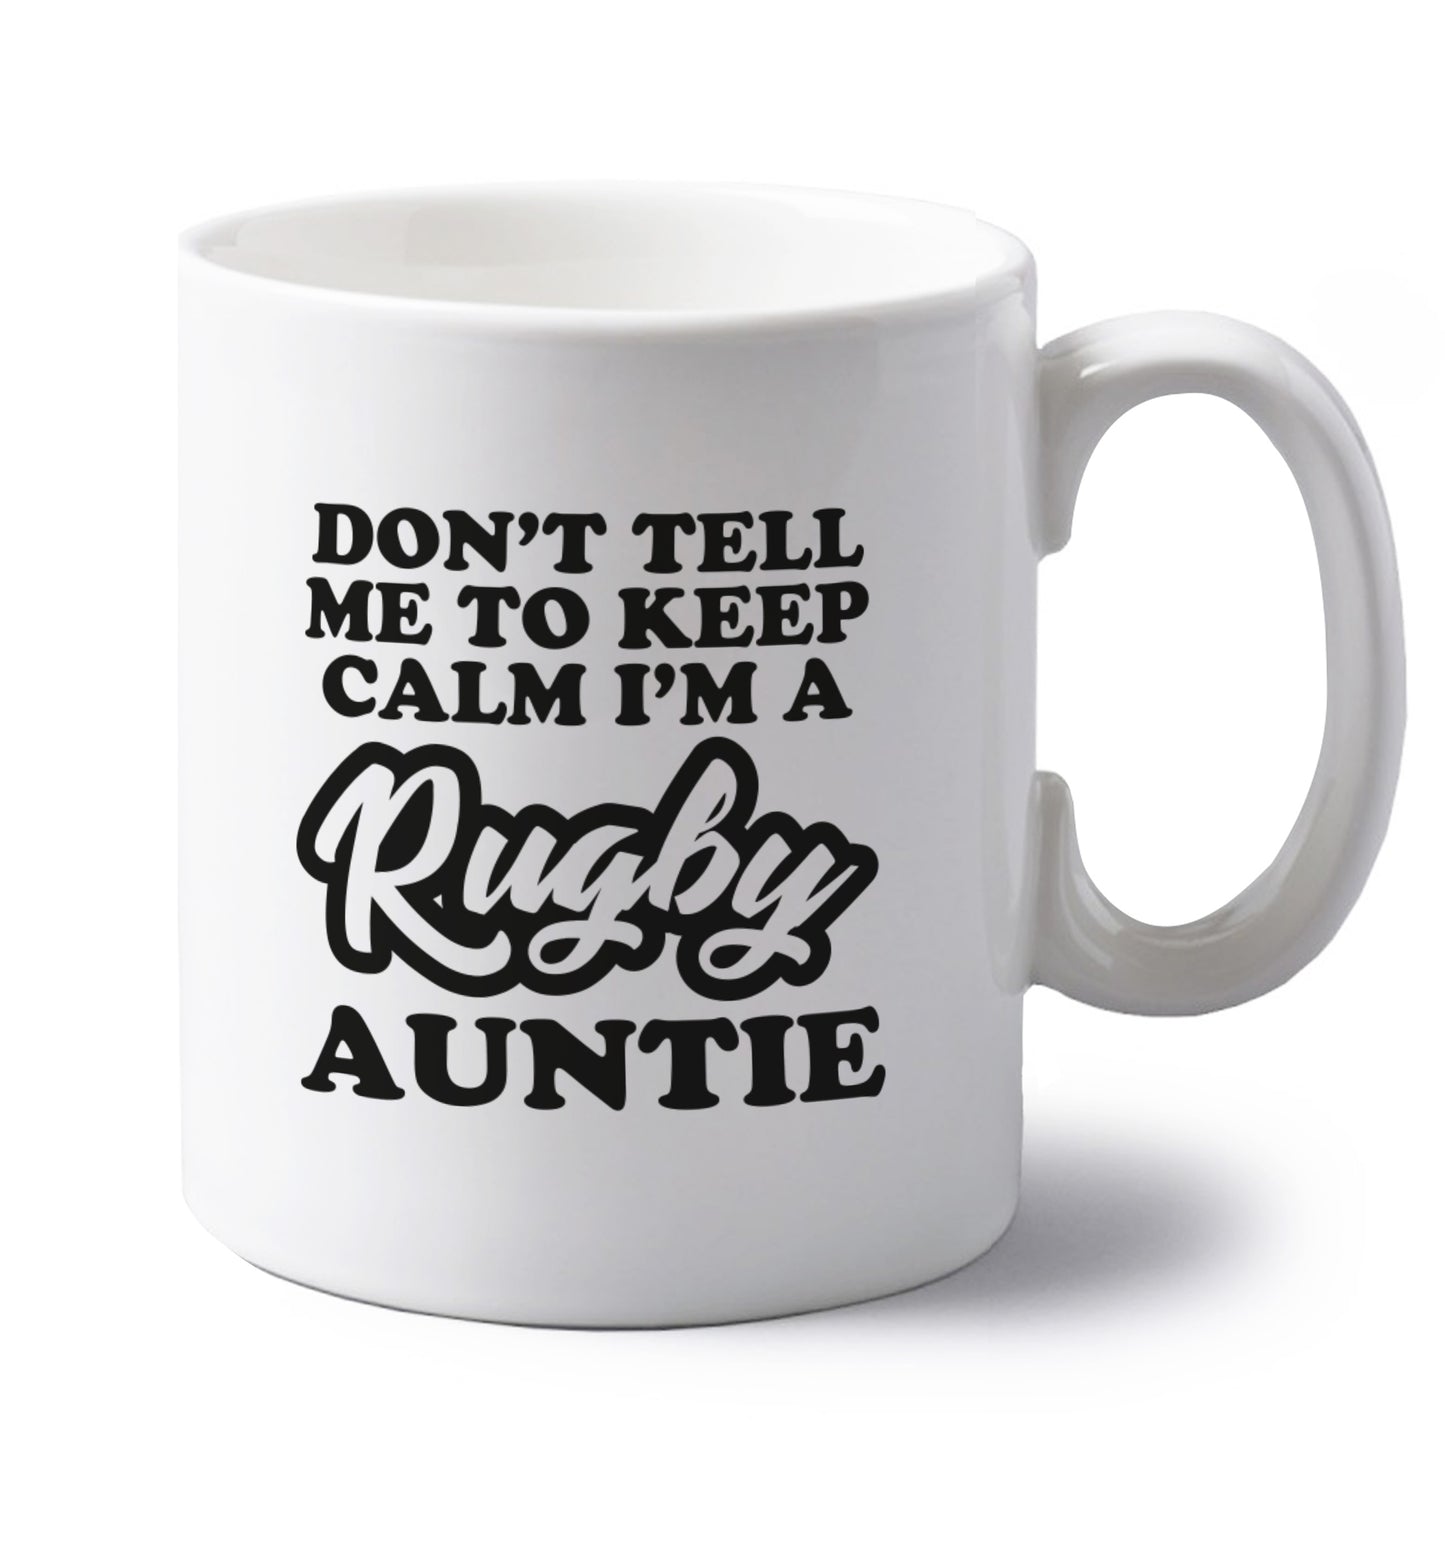 Don't tell me keep calm I'm a rugby auntie left handed white ceramic mug 